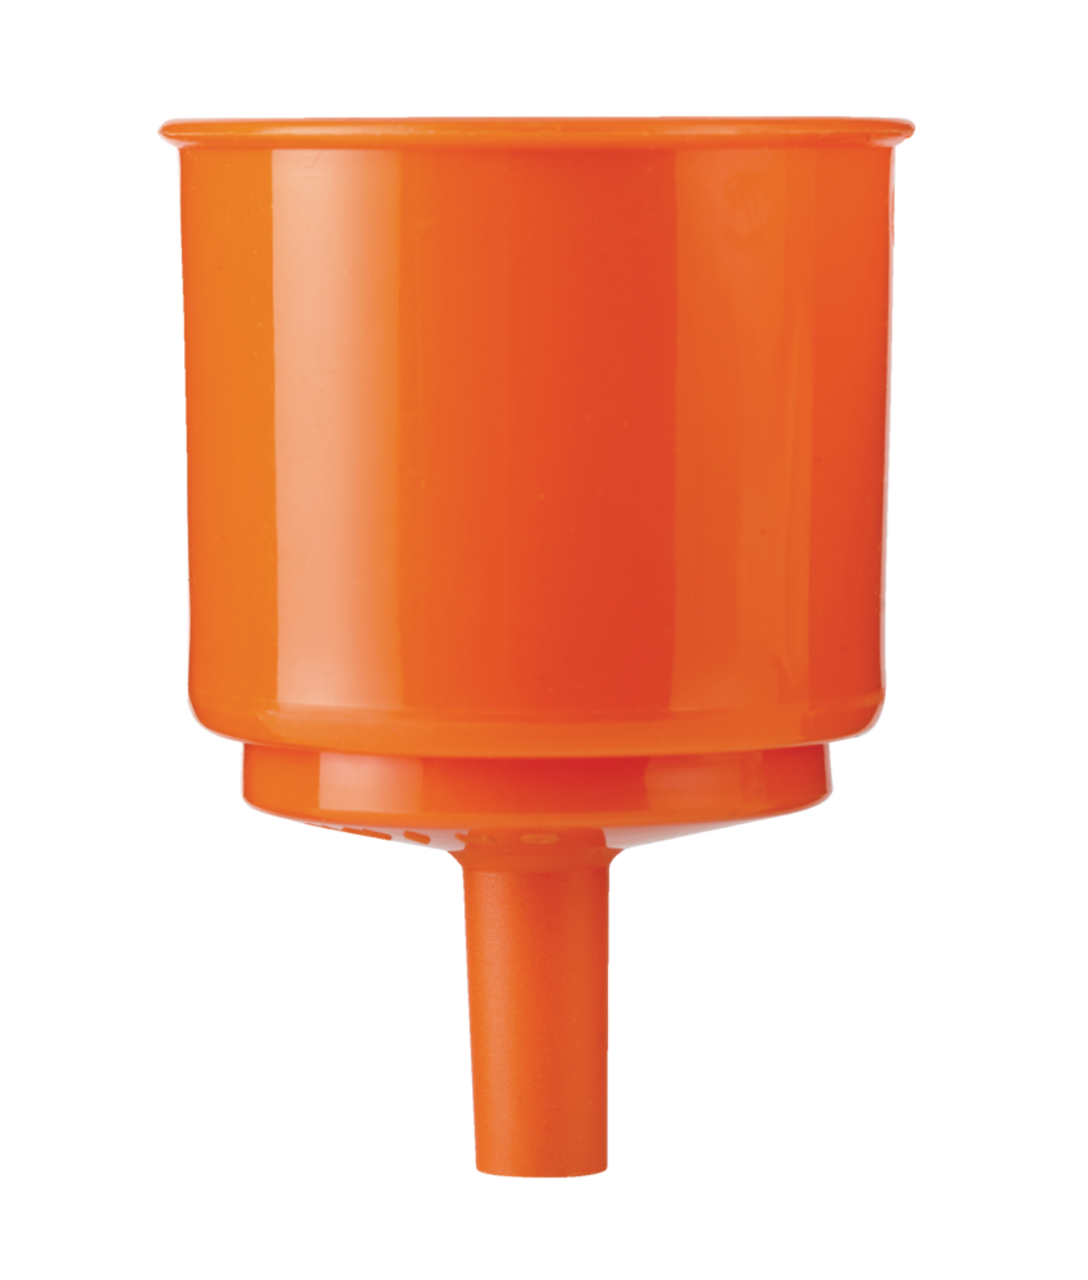 https://media-www.canadiantire.ca/product/playing/camping/camping-accessories/0765623/woods-strainer-funnel-21651fd5-6128-4a03-bd61-c538bb1baa20.png?imdensity=1&imwidth=640&impolicy=mZoom